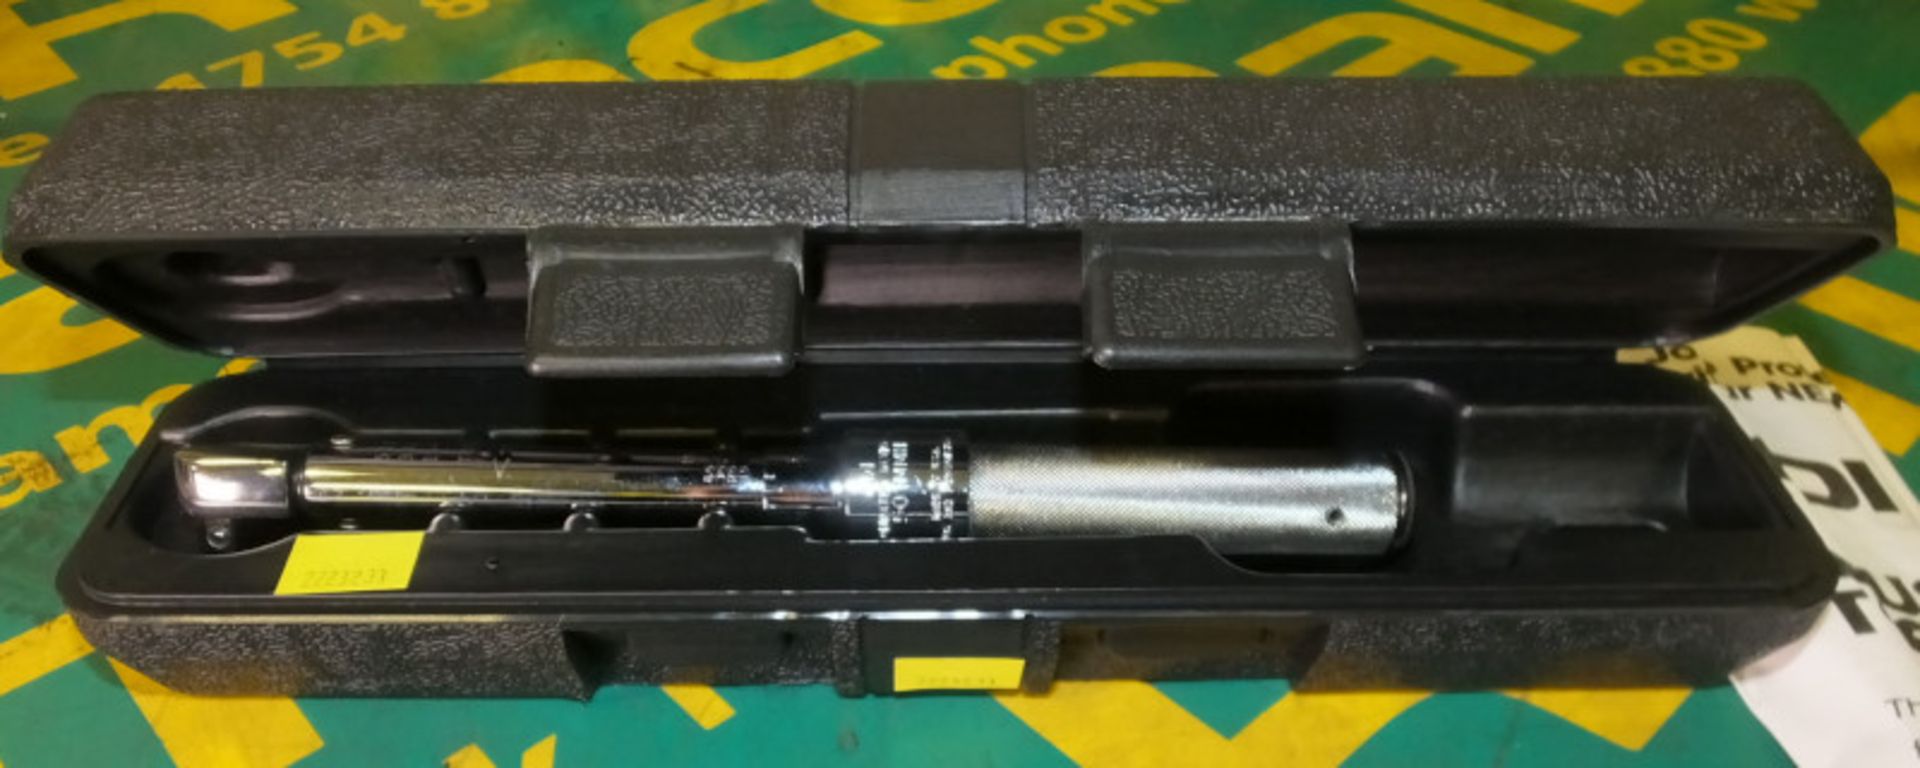 CDI 501MMH Torque Wrench 30-150 in. lb with case - Image 3 of 3